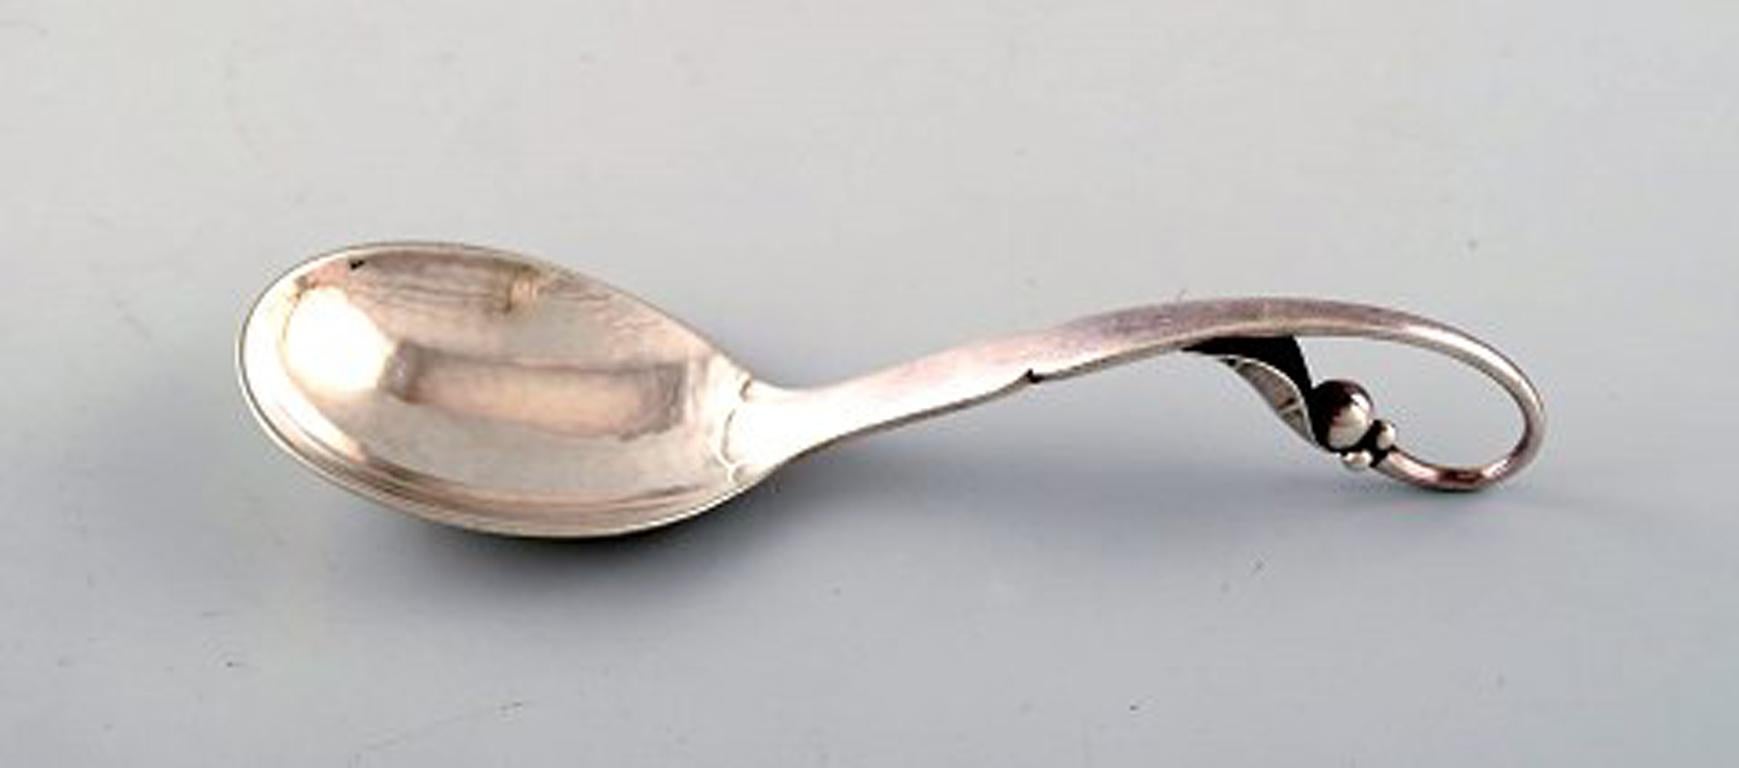 Georg Jensen sterling silver Nr. 21, marmalade spoon.
Measures: Length 13 cm.
Stamped.
Very good condition.